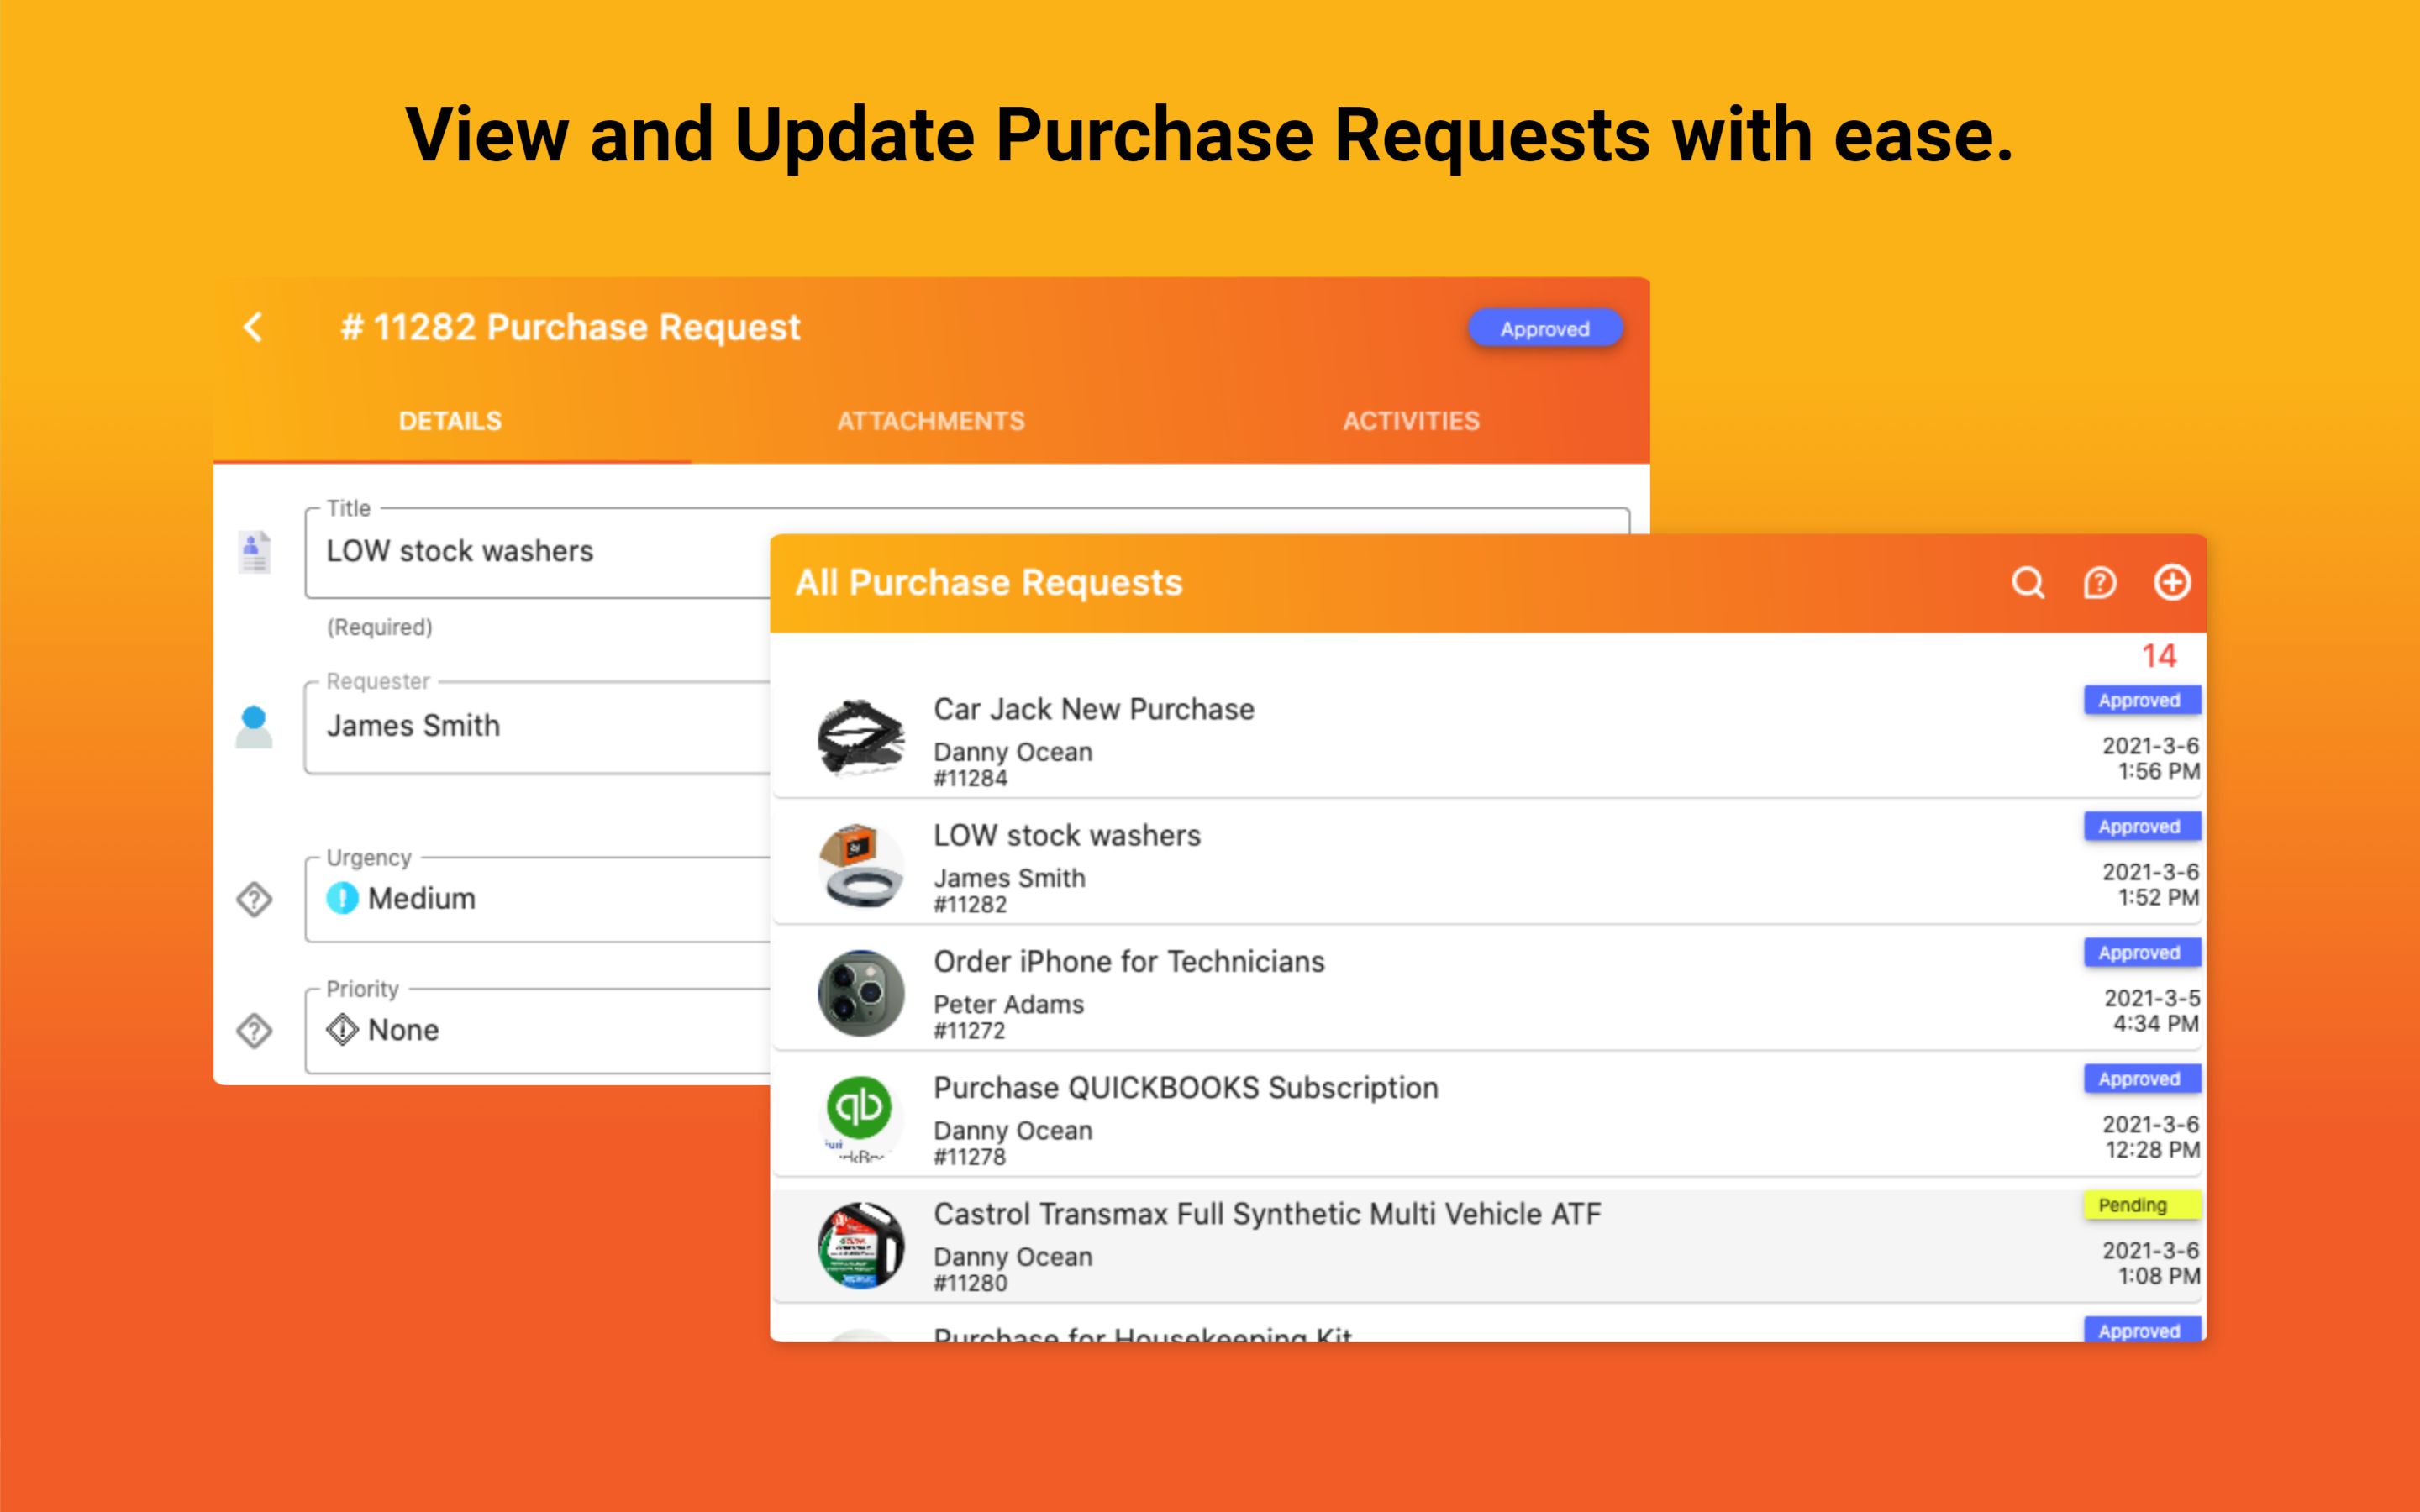 Submit purchase requests for the parts that are needed to complete the assigned Work Oder.